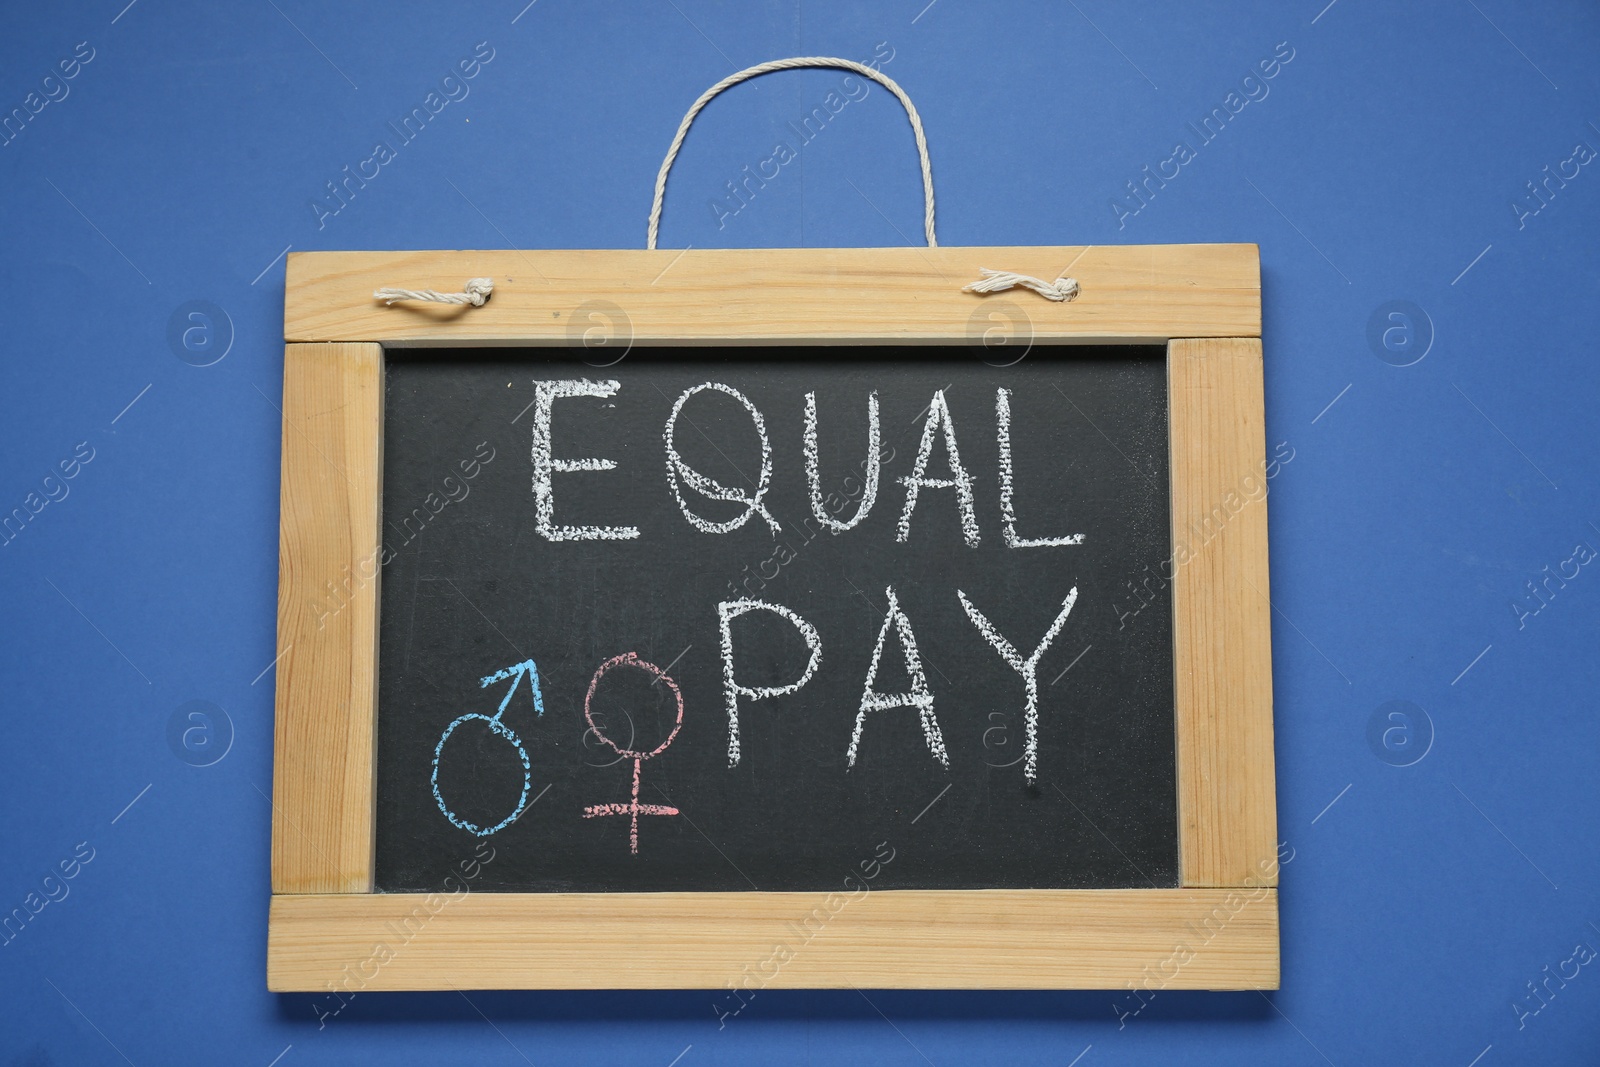 Photo of Blackboard with words Equal Pay and gender symbols on blue background, top view